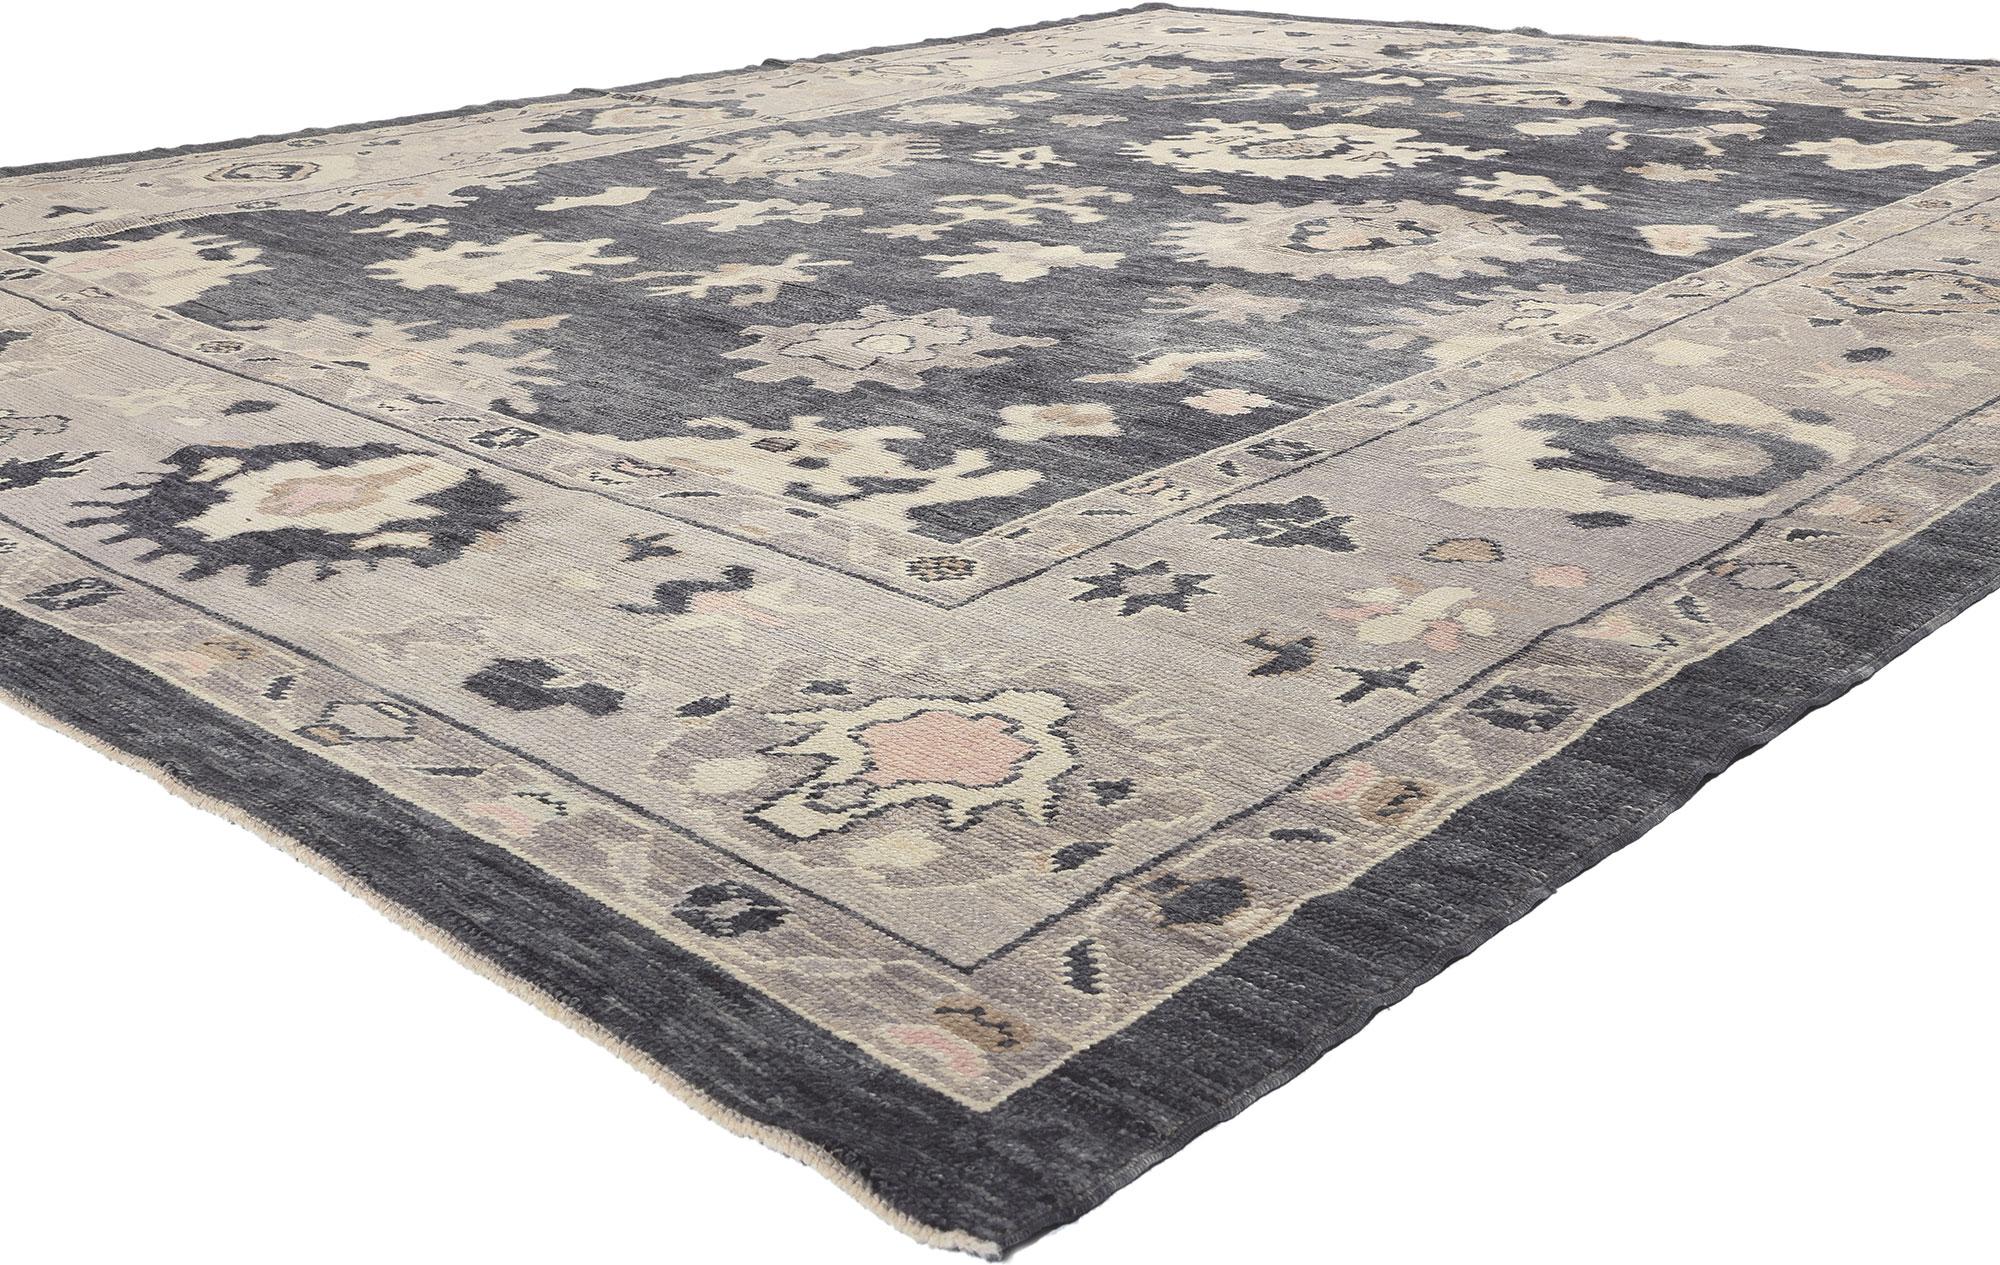 52362 Modern Black Oushak Turkish Rug, 10'00 x 12'05. In this exquisite hand-knotted wool Turkish Oushak rug, the intersection of contemporary elegance and the alluring essence of Organic Modern style unfolds. A luxuriously striated expanse in